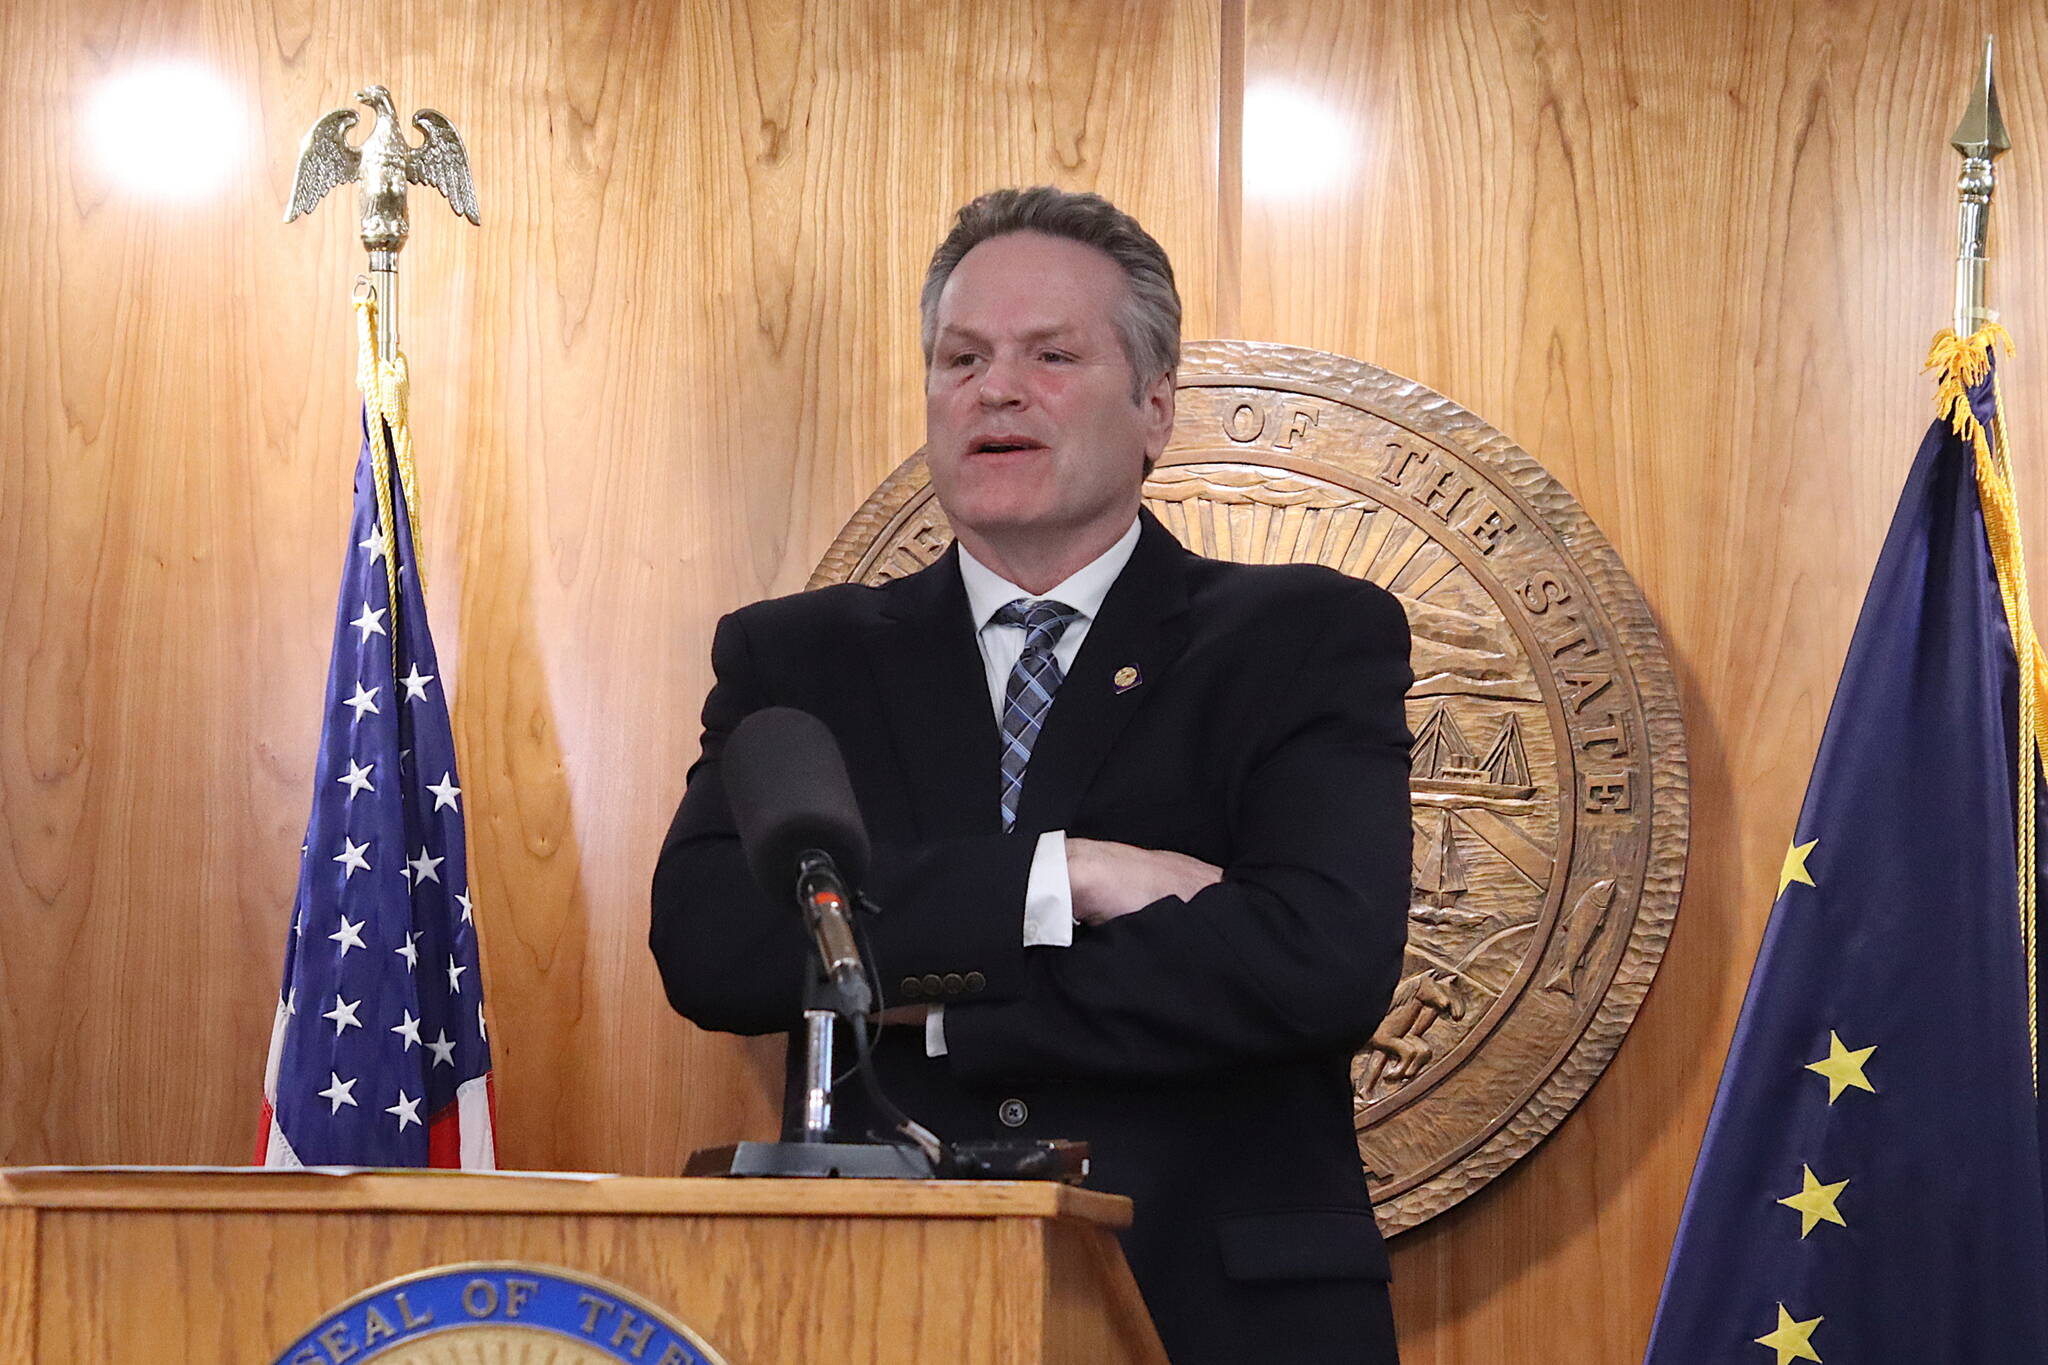 Gov. Mike Dunleavy discusses his veto of a wide-ranging education bill during a press conference Friday at the Alaska State Capitol. (Mark Sabbatini / Juneau Empire)